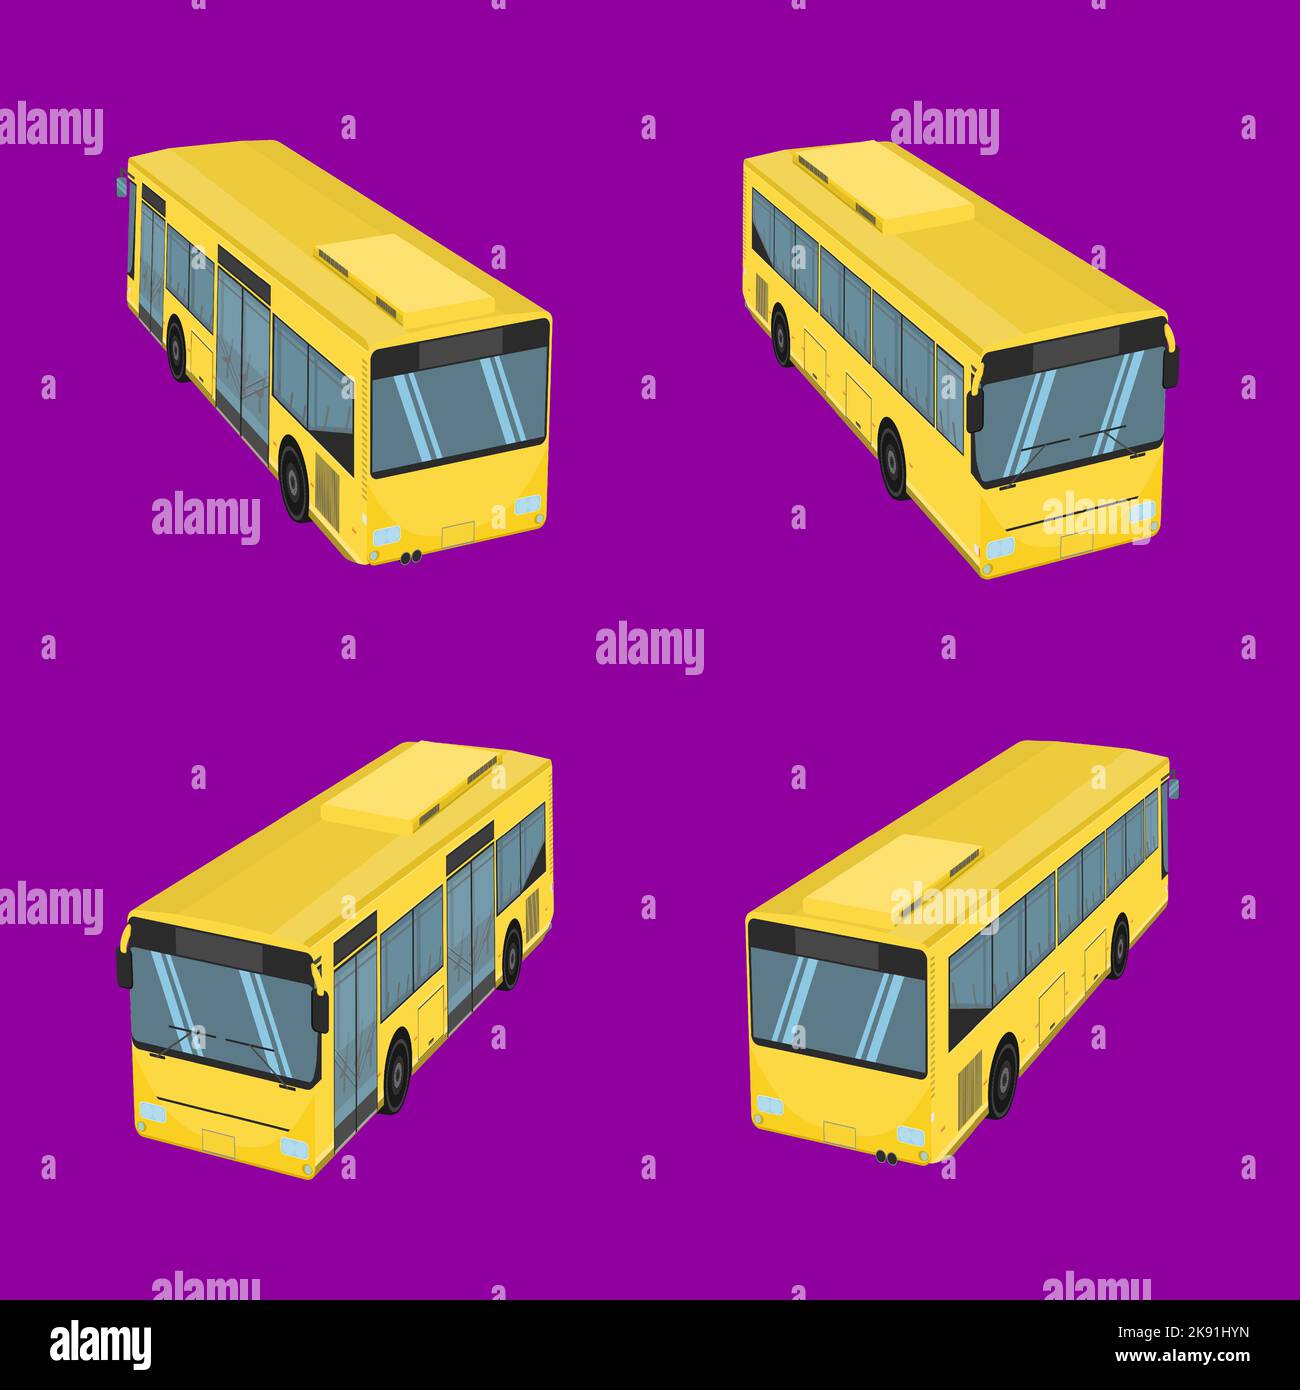 An illustration of four buses in different positions on a purple background Stock Vector